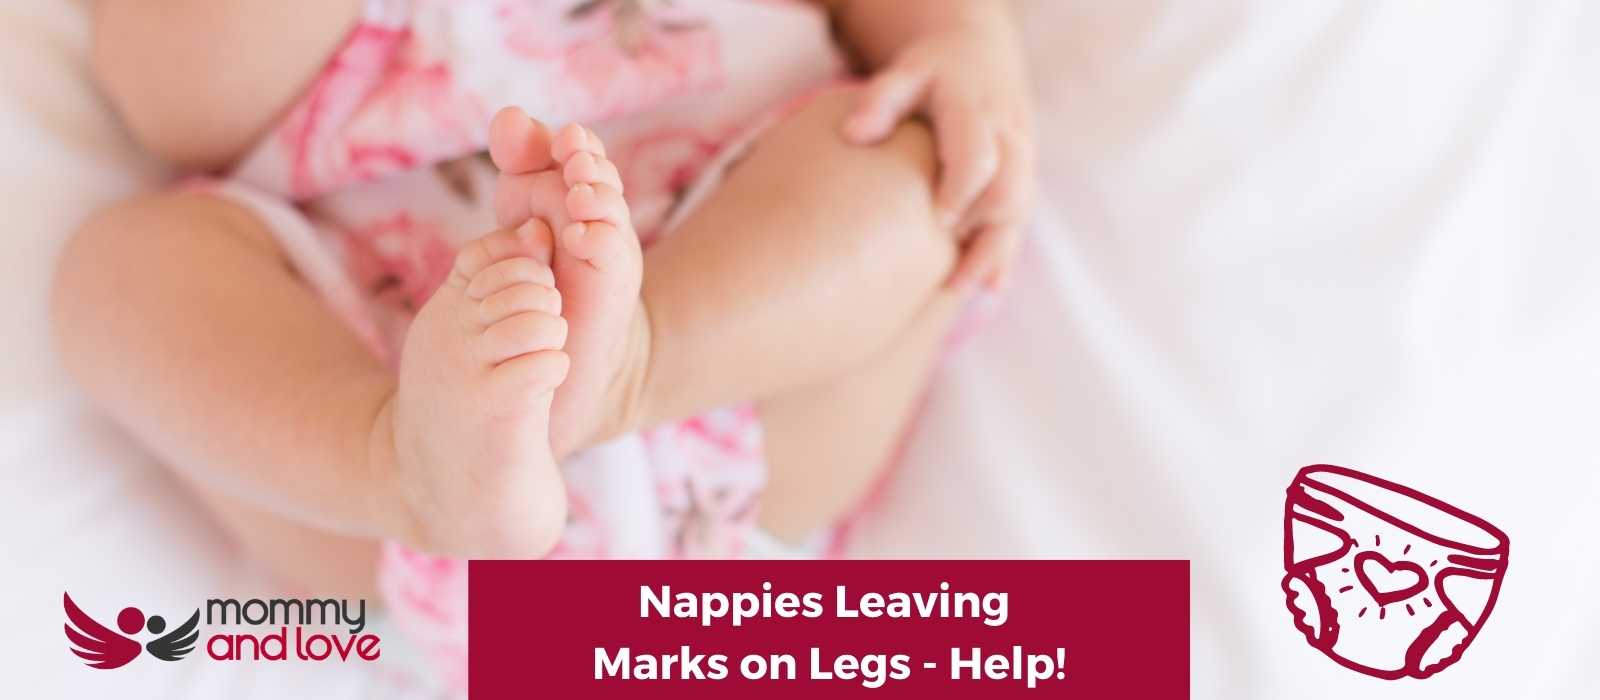 Nappies Leaving Marks on Legs - Help!